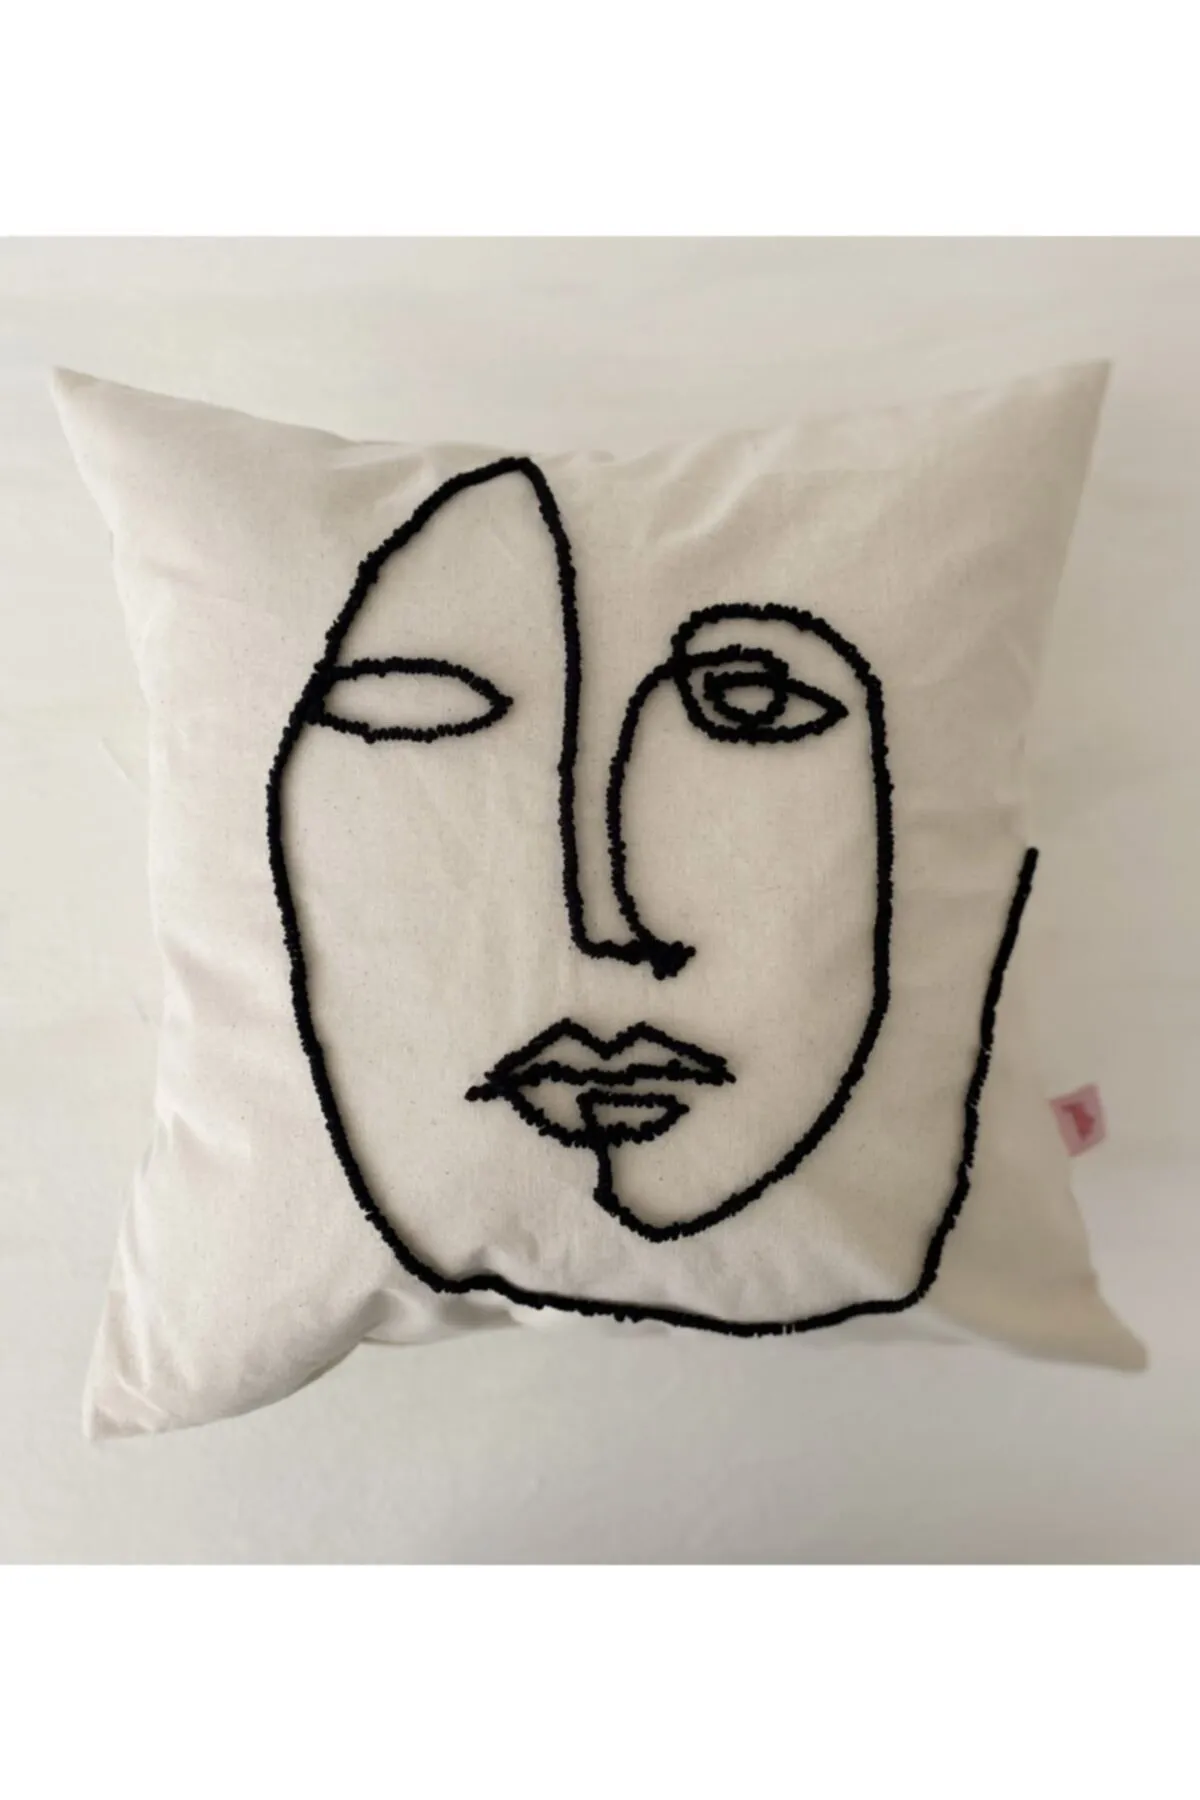 Mija Washed Linen One Line Art Punch Throw Pillow Cover